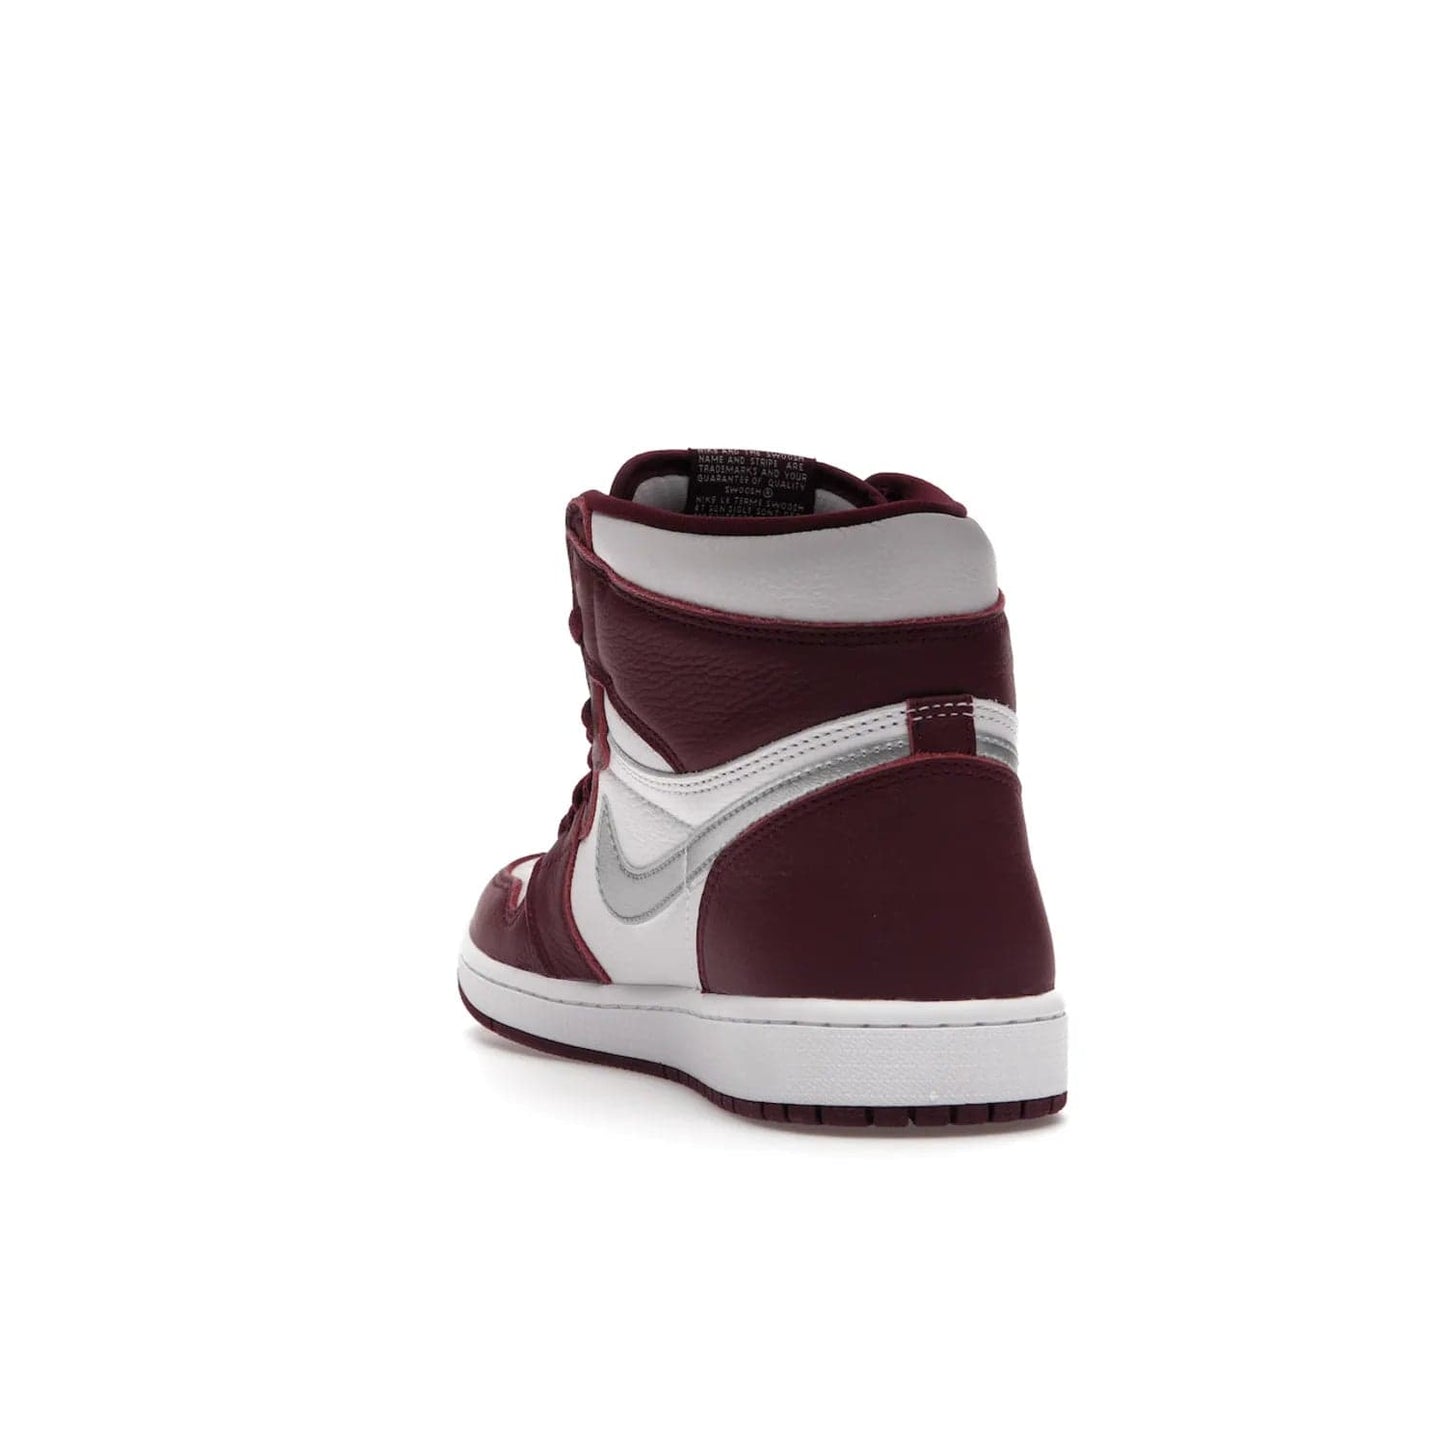 Jordan 1 Retro High OG Bordeaux - Image 26 - Only at www.BallersClubKickz.com - Shop the classic Air Jordan 1 High Bordeaux with a modern high-top cut. The timeless Bordeaux and White-Metallic Silver colorway, releasing Nov 20, 2021, is perfect for practice or a night out.